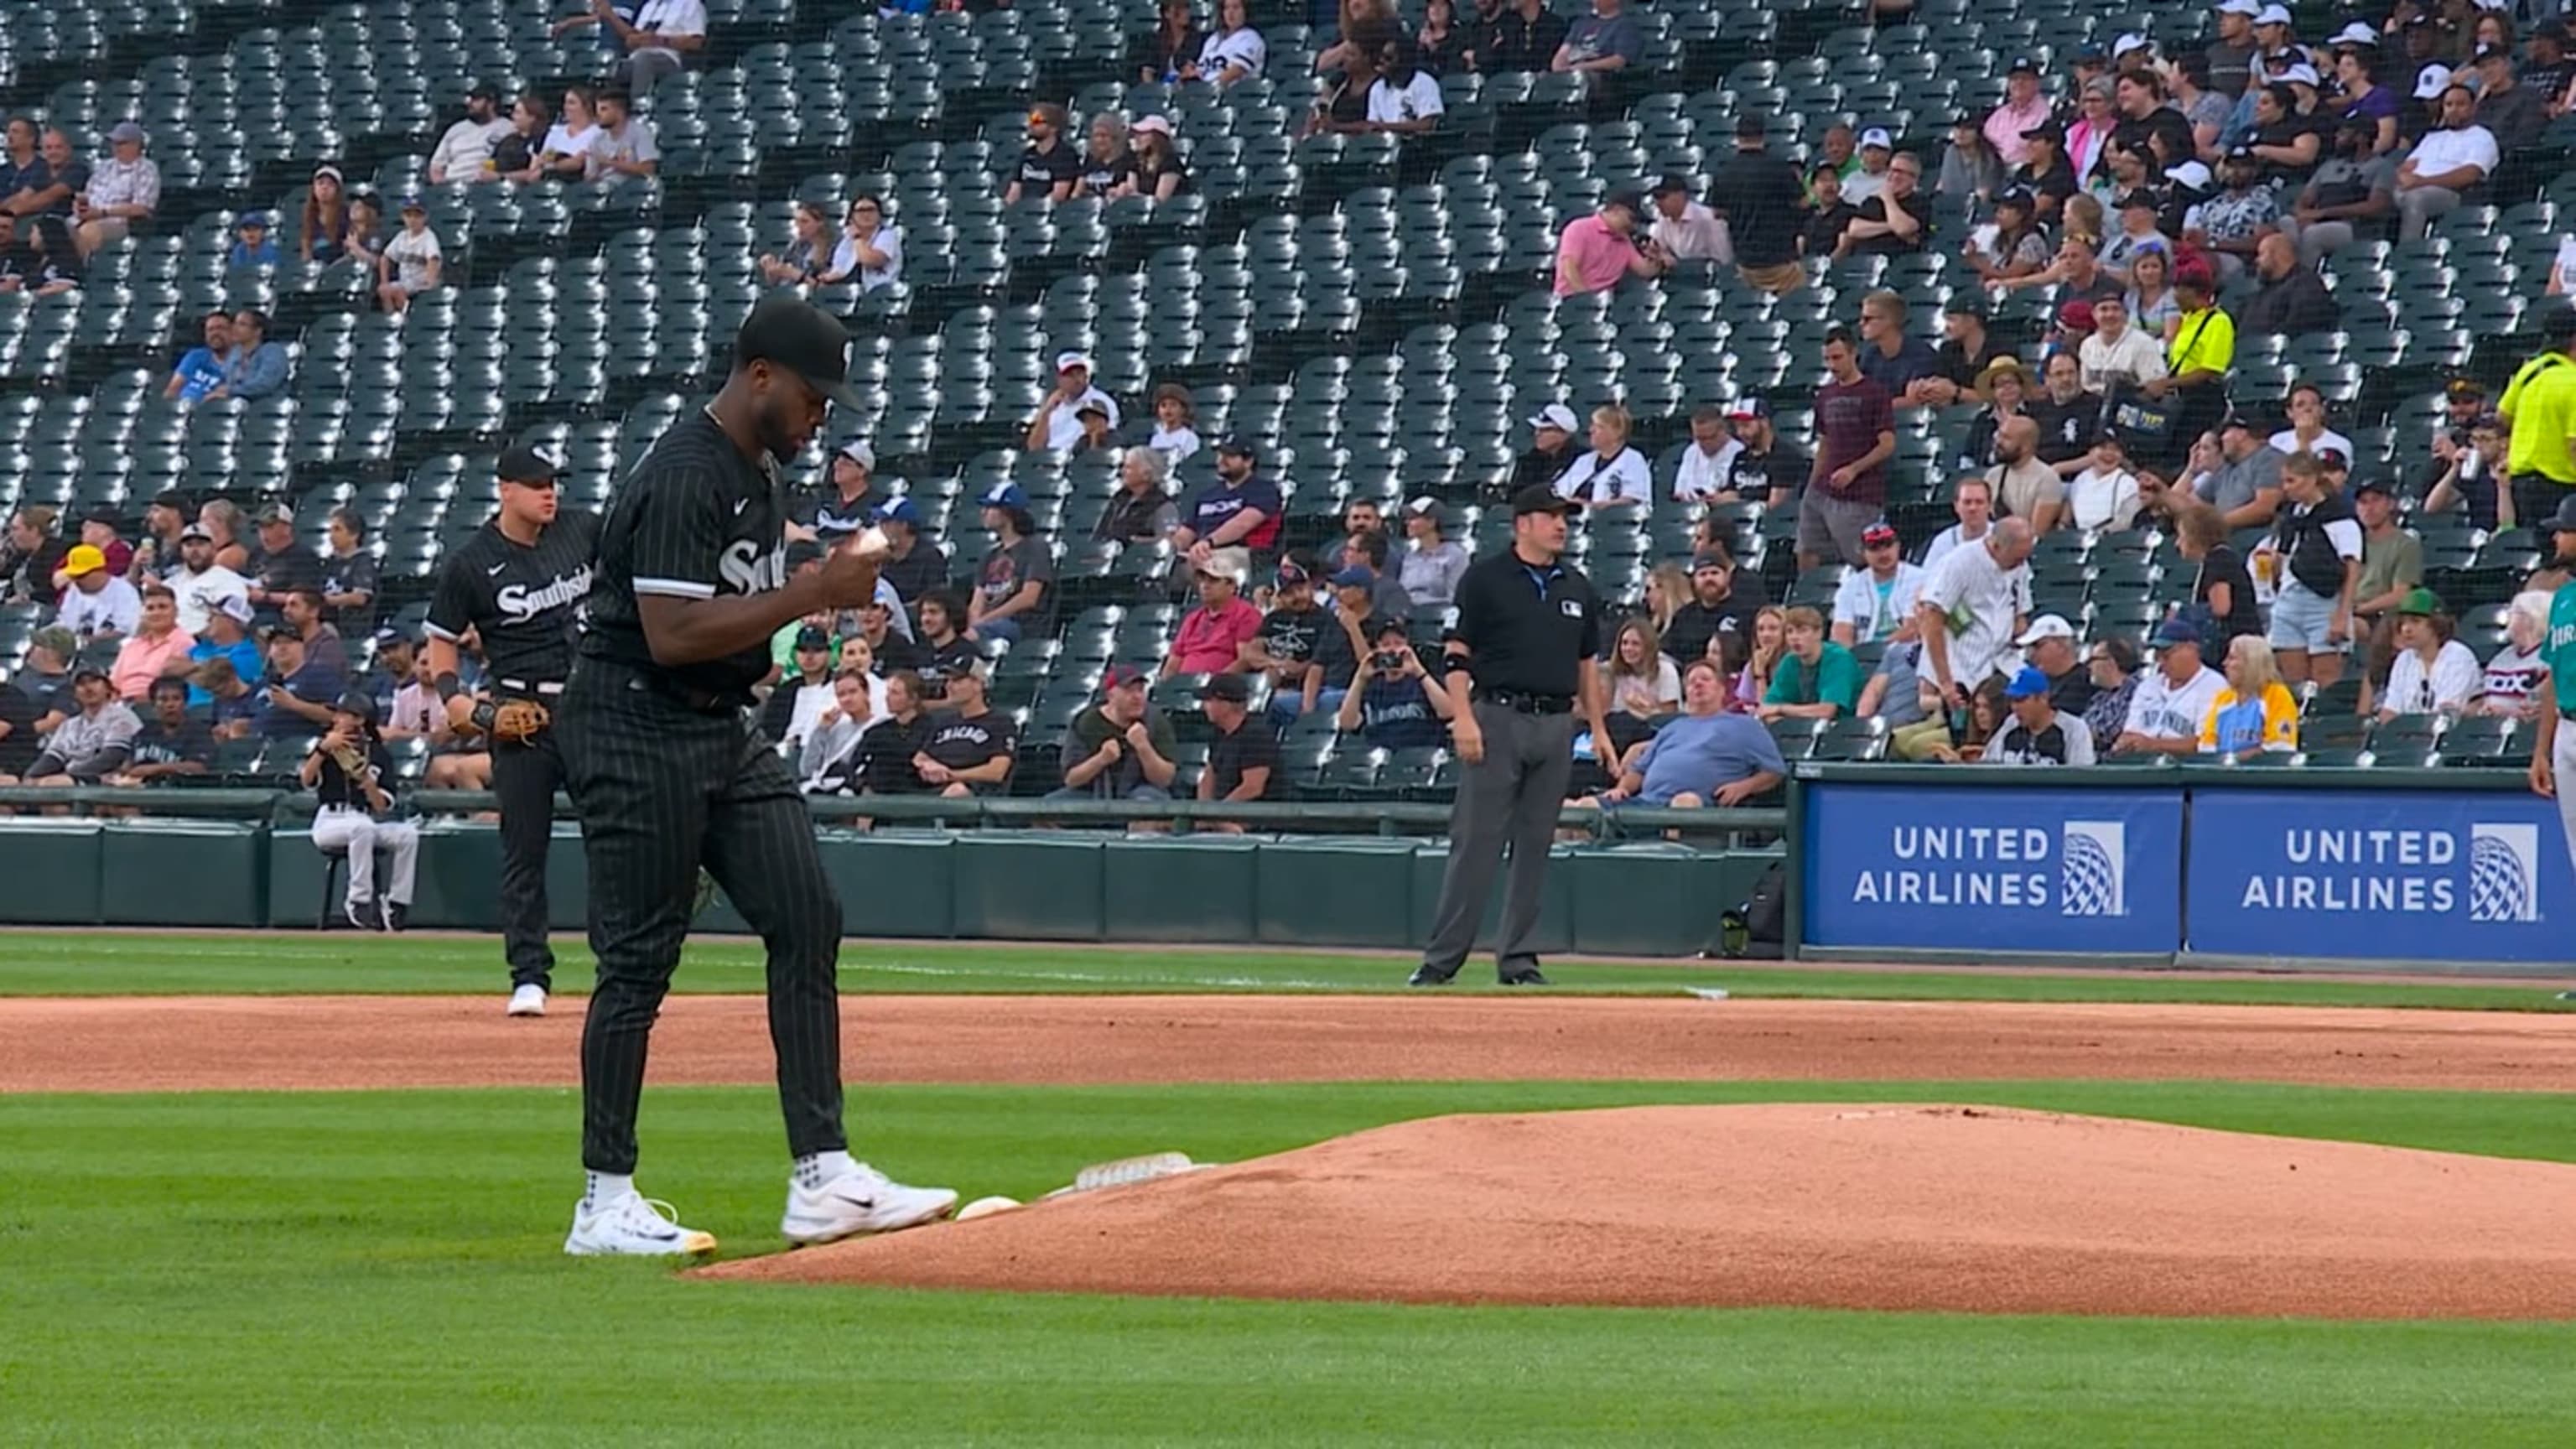 Mariners hope to slow White Sox's Elvis Andrus – NBC Sports Chicago